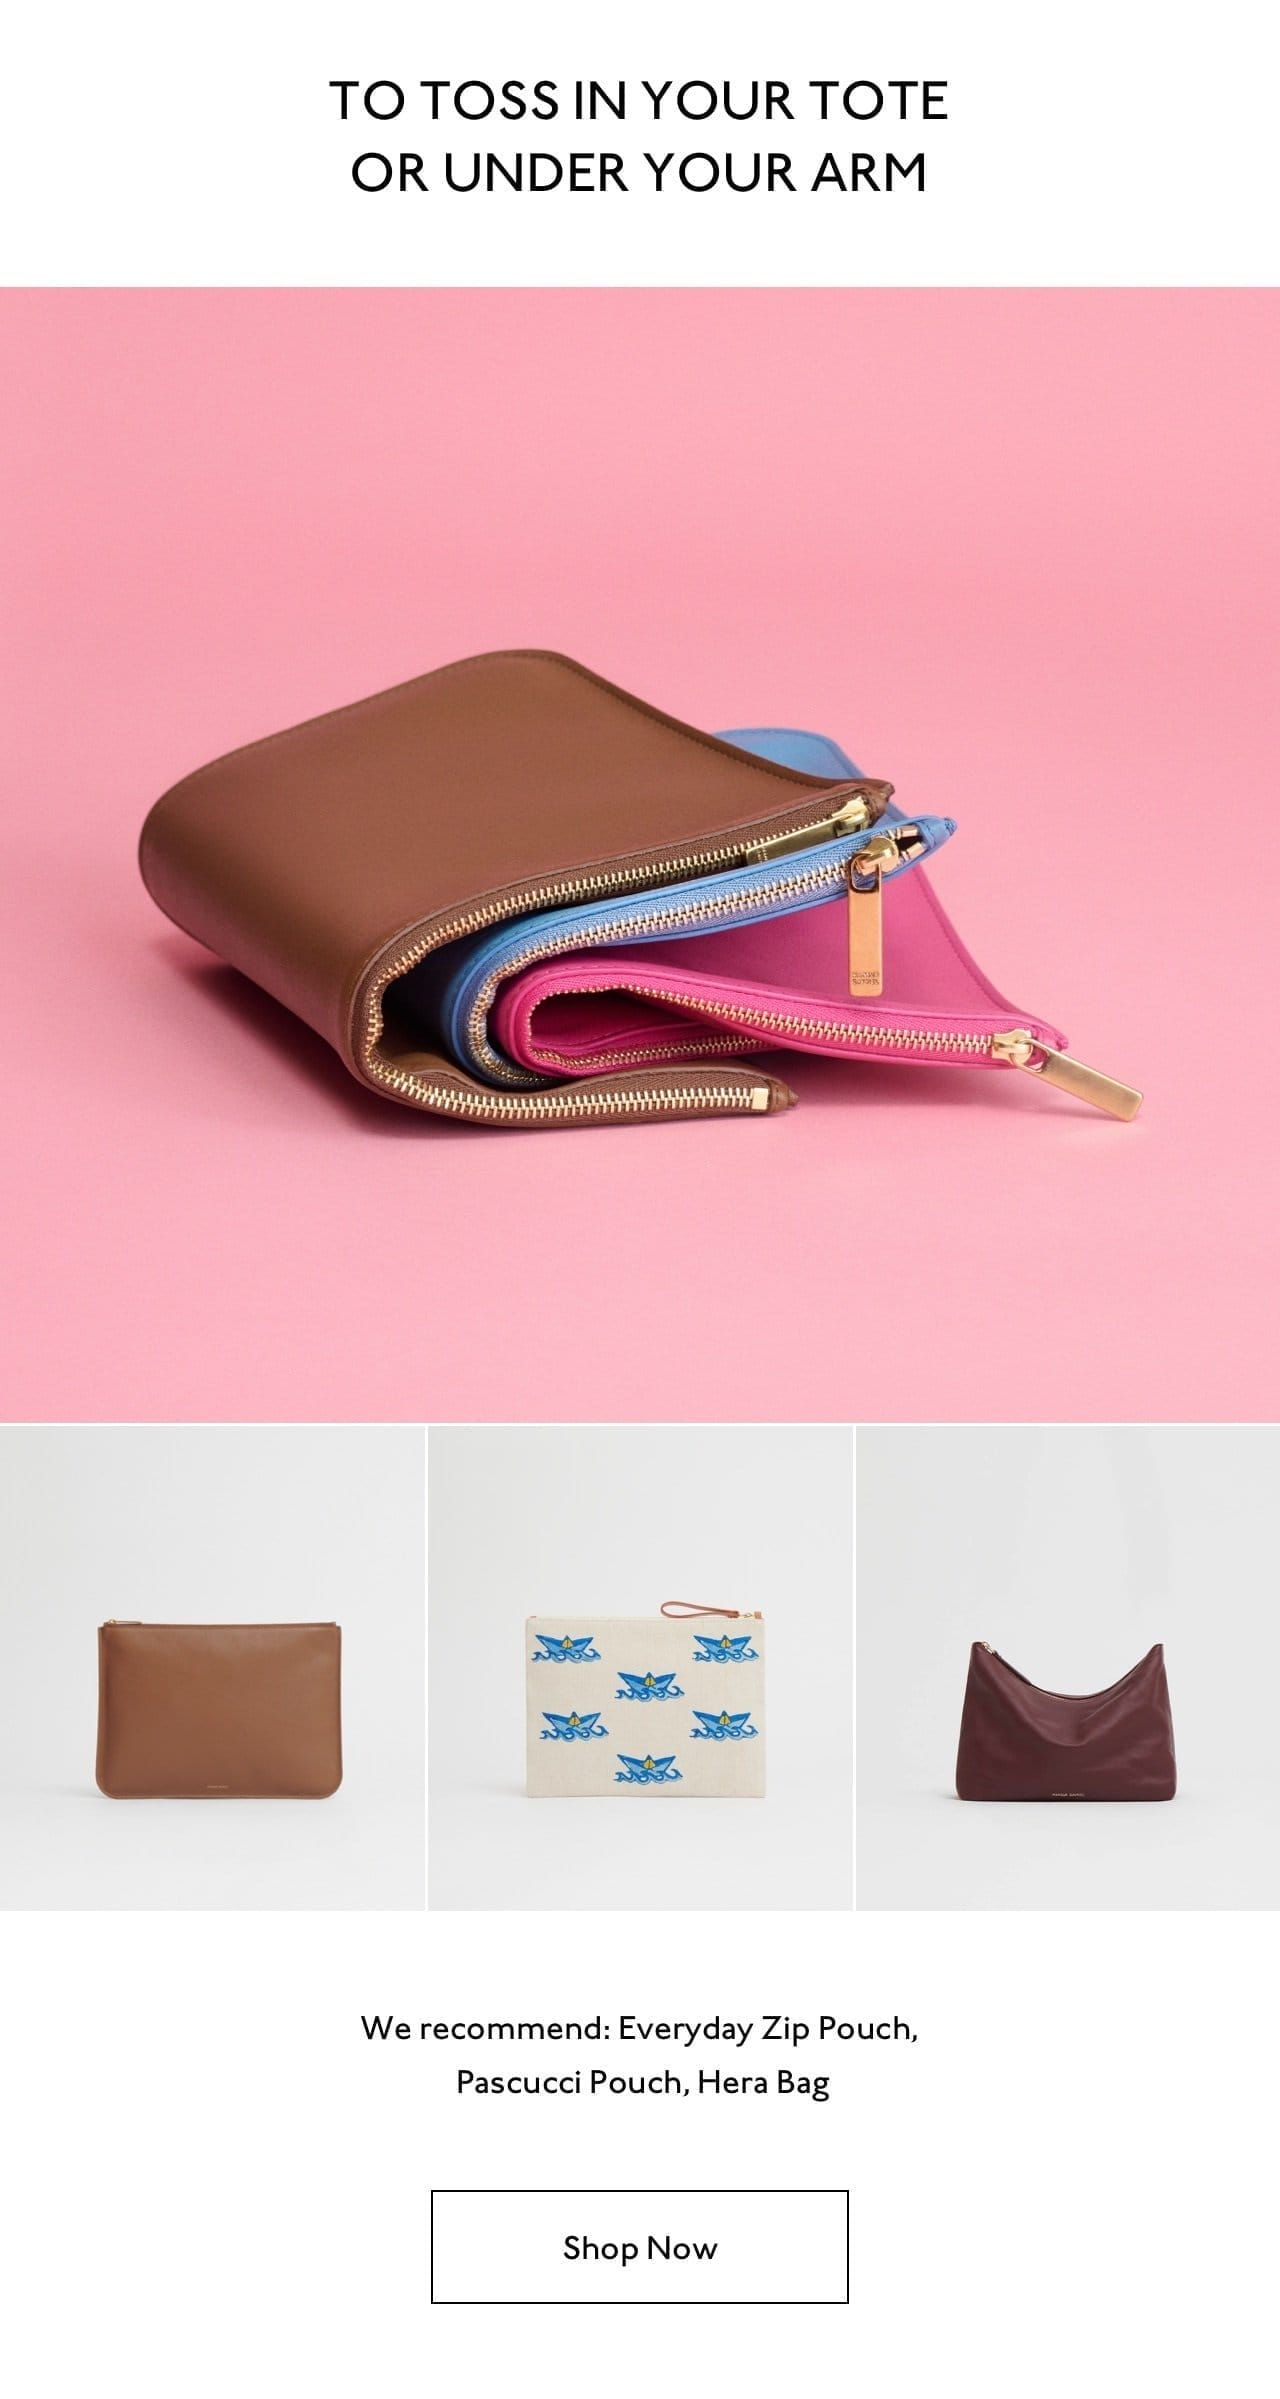 To toss in your tote or under your arm we recommend: Everyday Zip Pouch, Pascucci Pouch, Hera Bag.